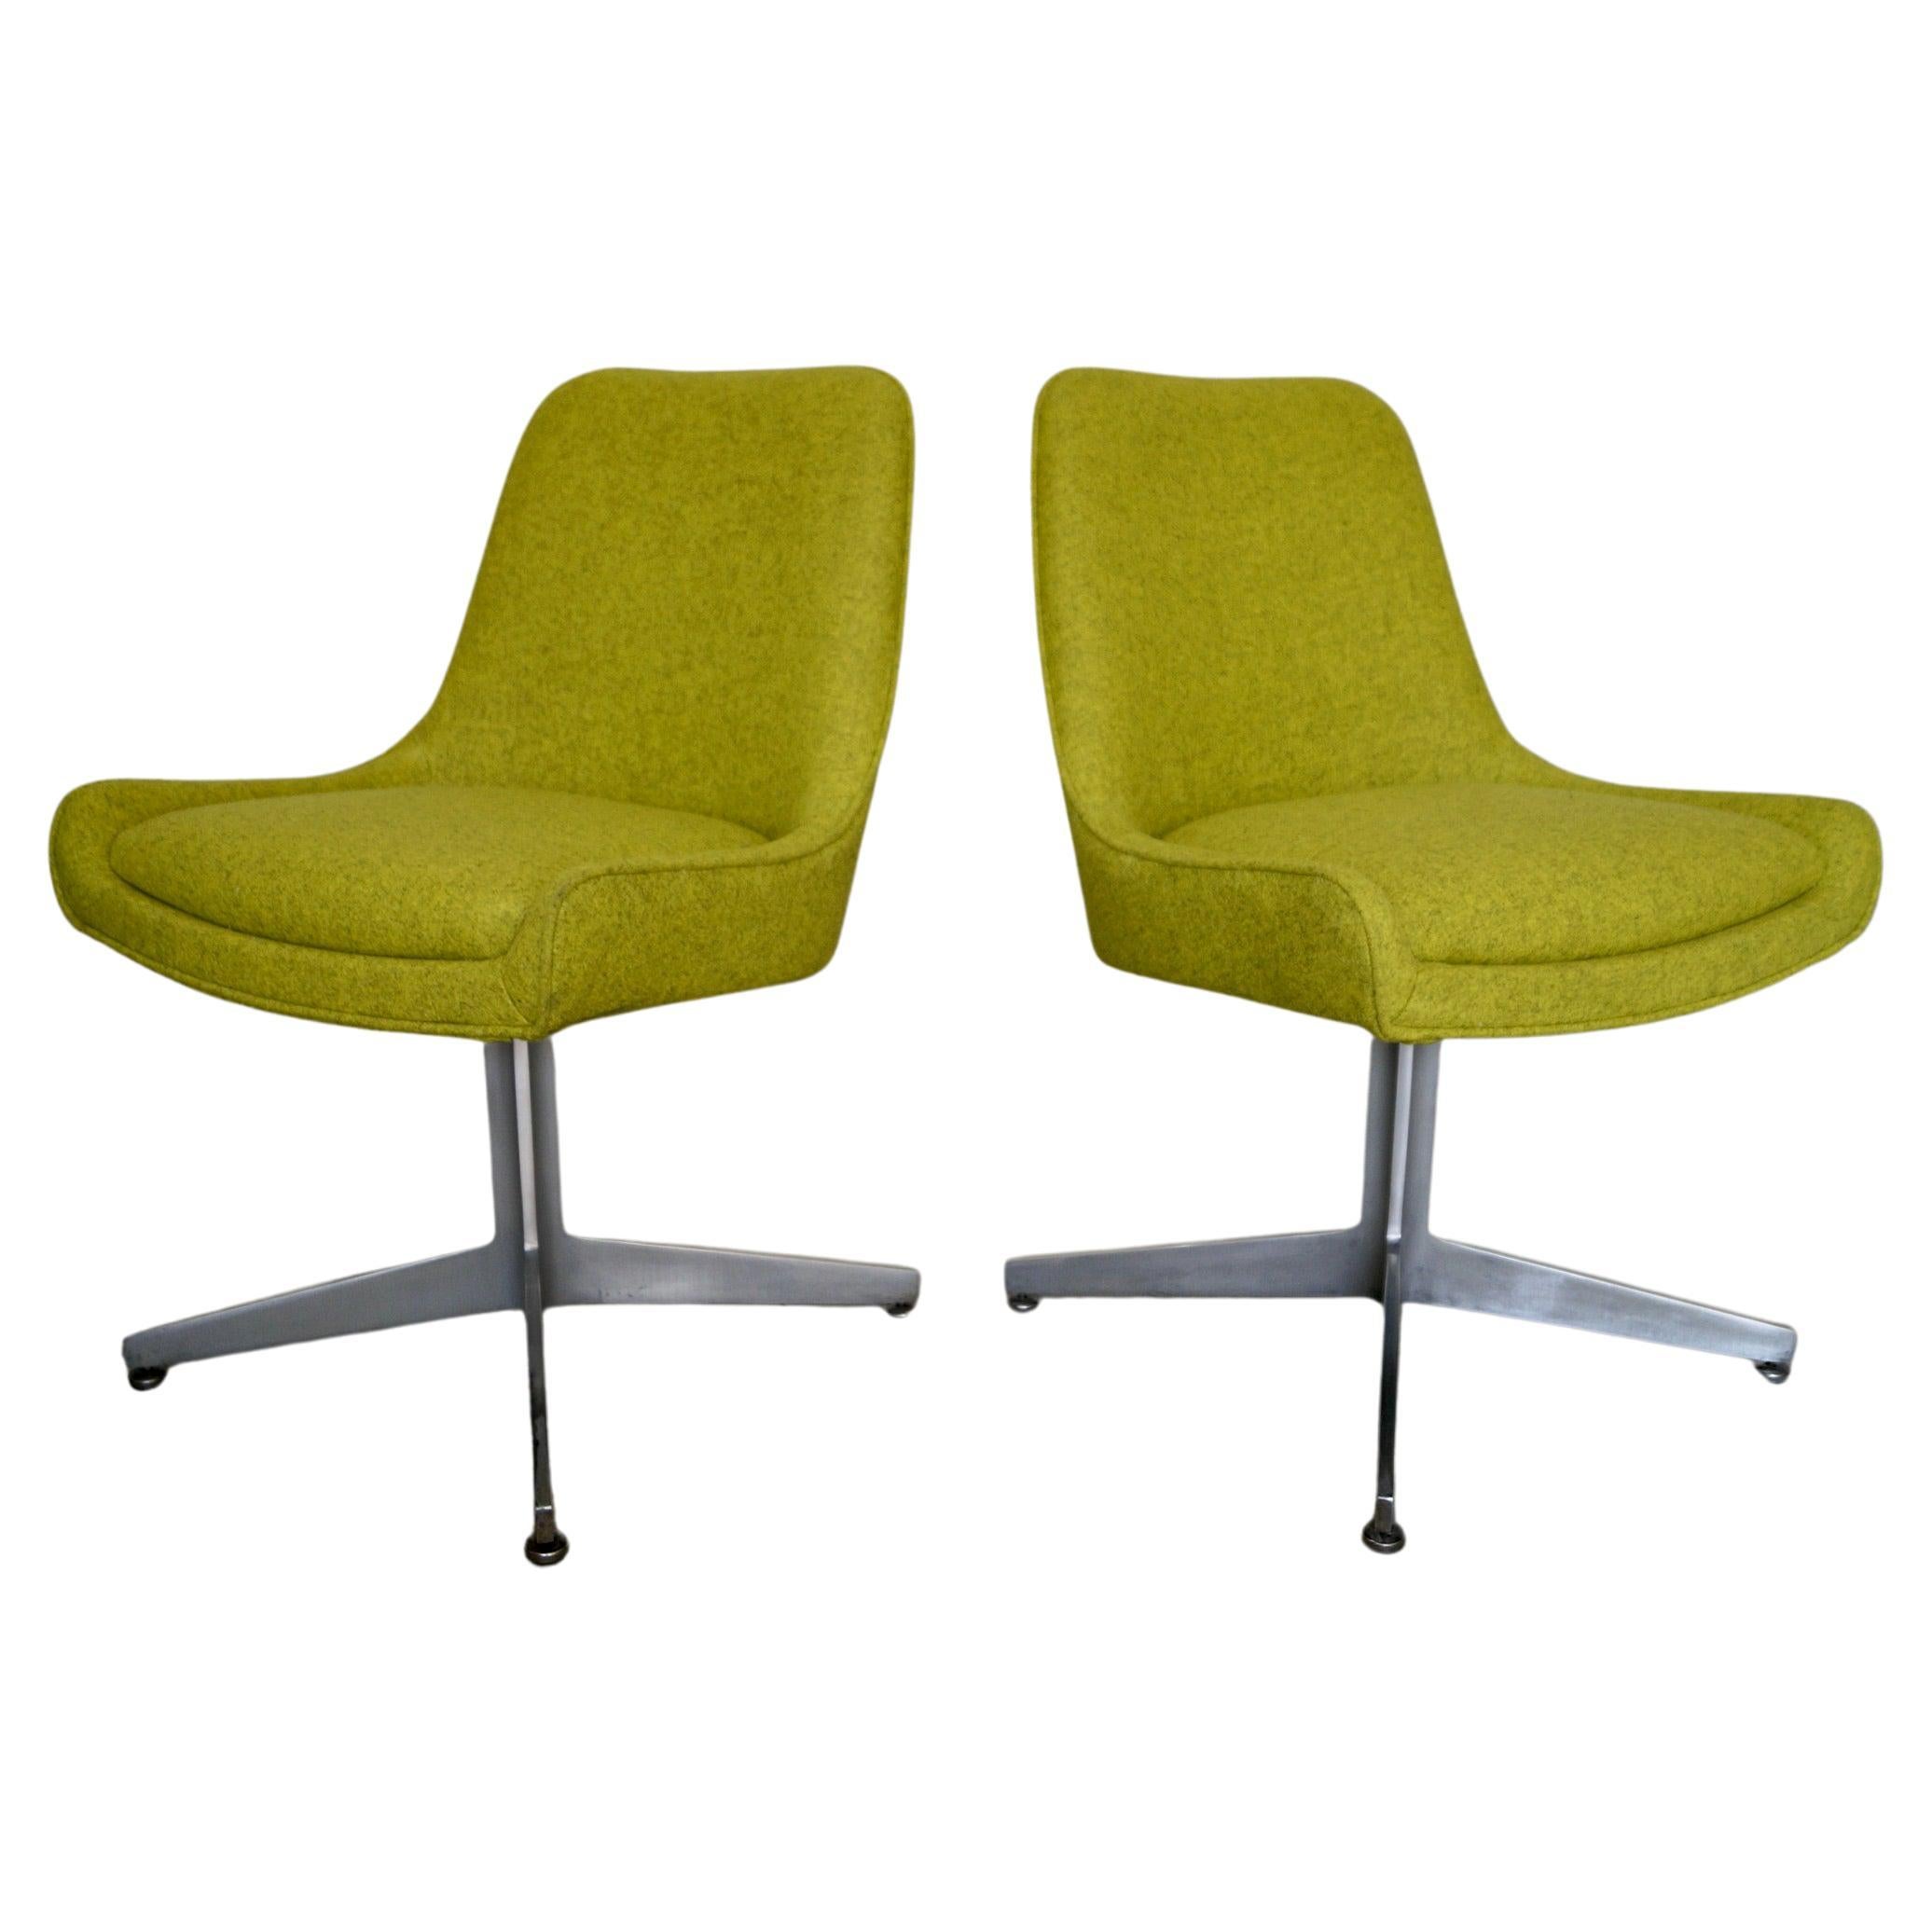 1960's Mid-Century Modern Side Chairs, a Pair